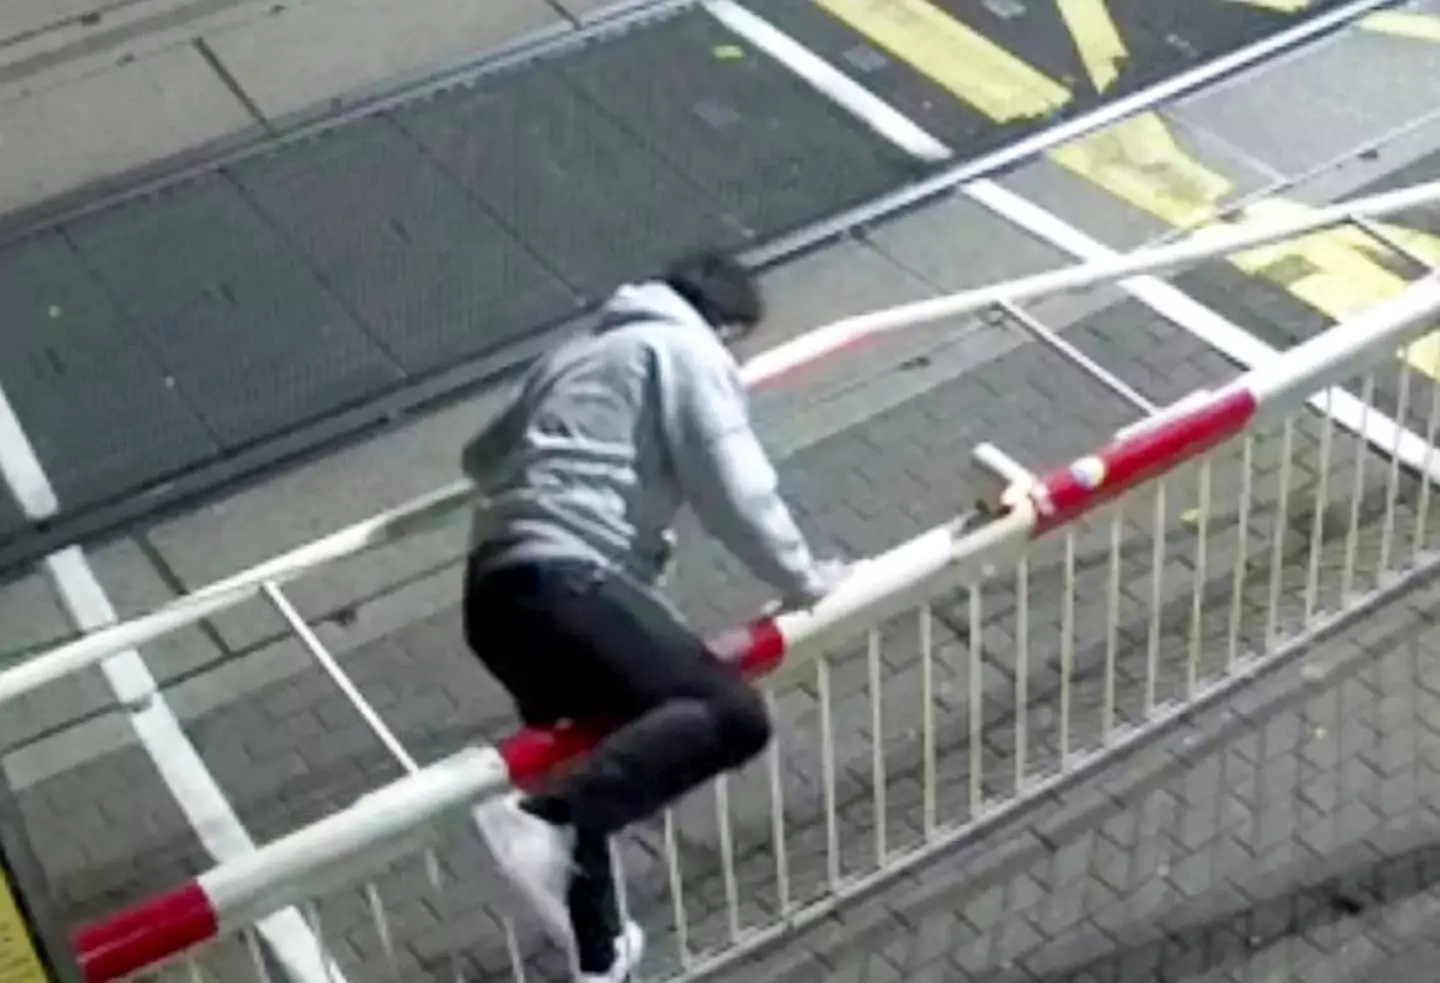 CCTV caught the young man clambering over the barrier and walking across the tracks.